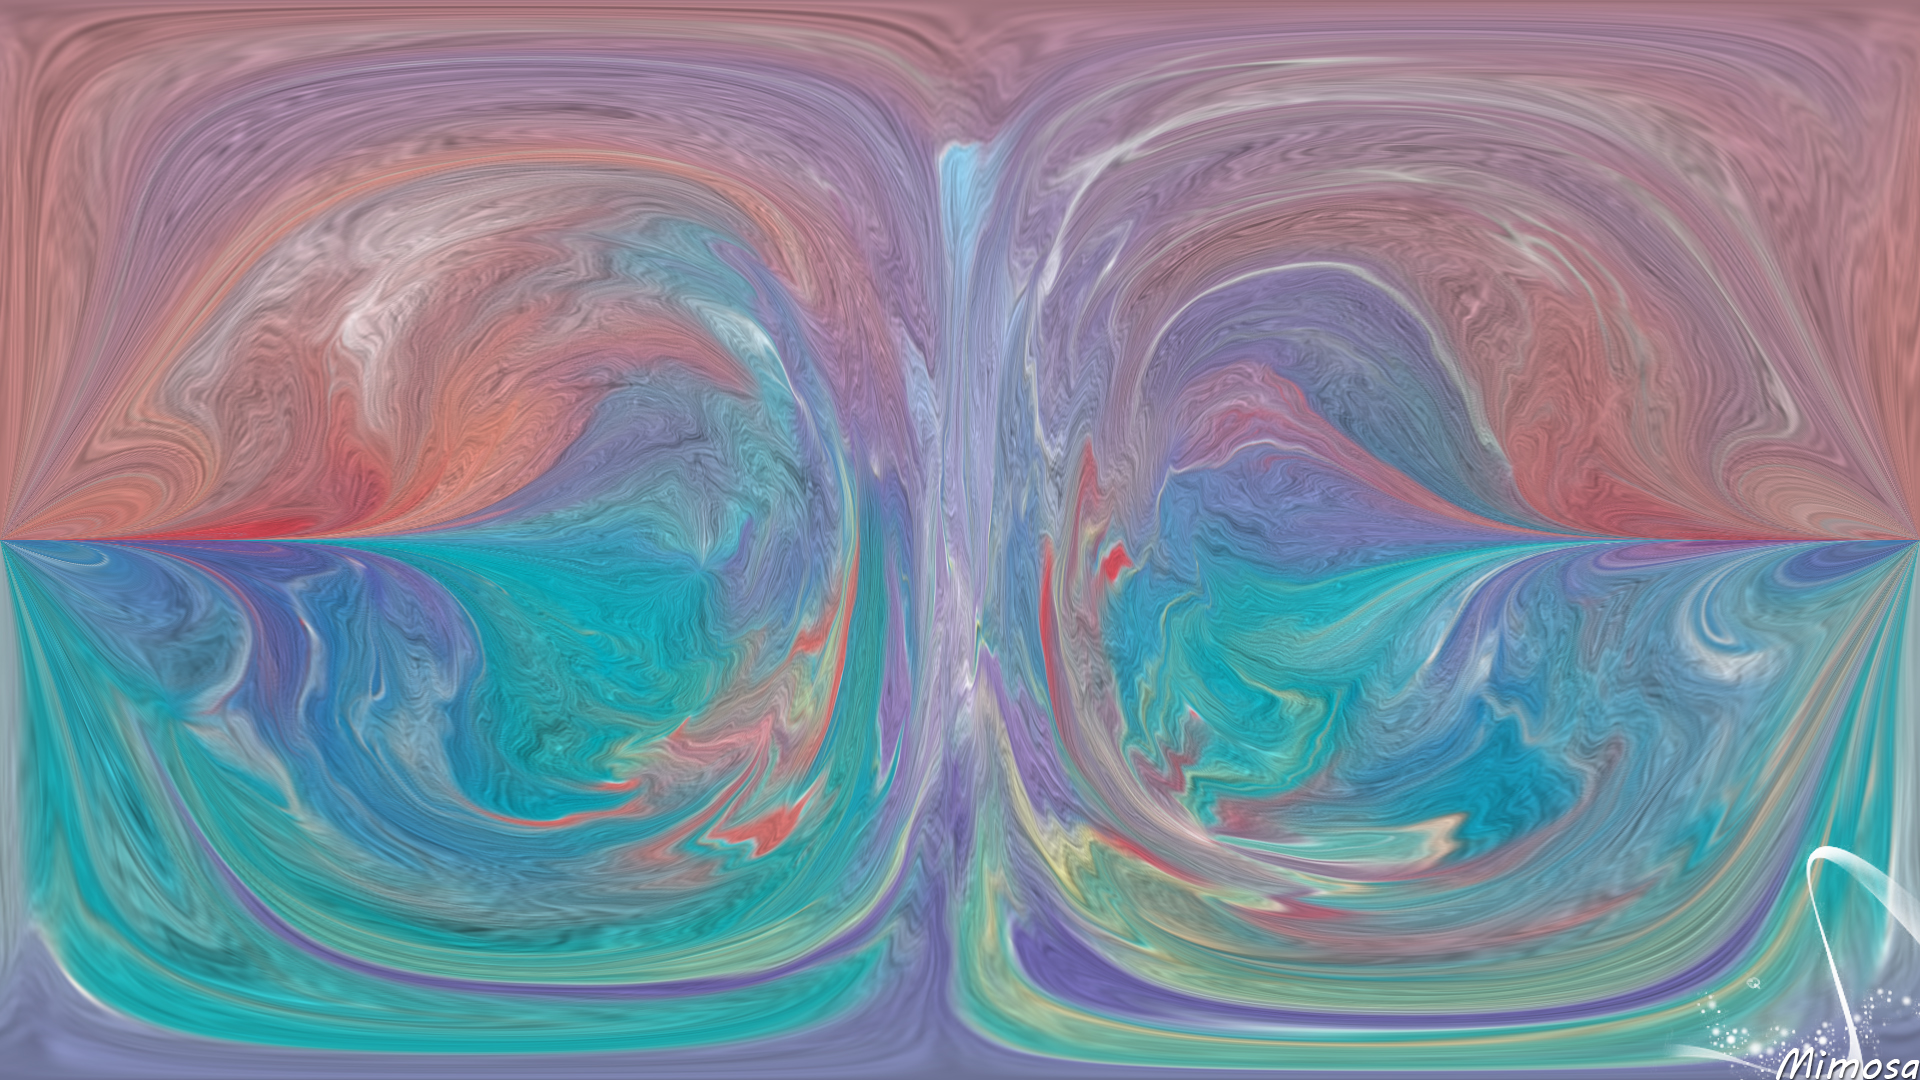 Abstract Artistic Colors Digital Art Marble 1920x1080